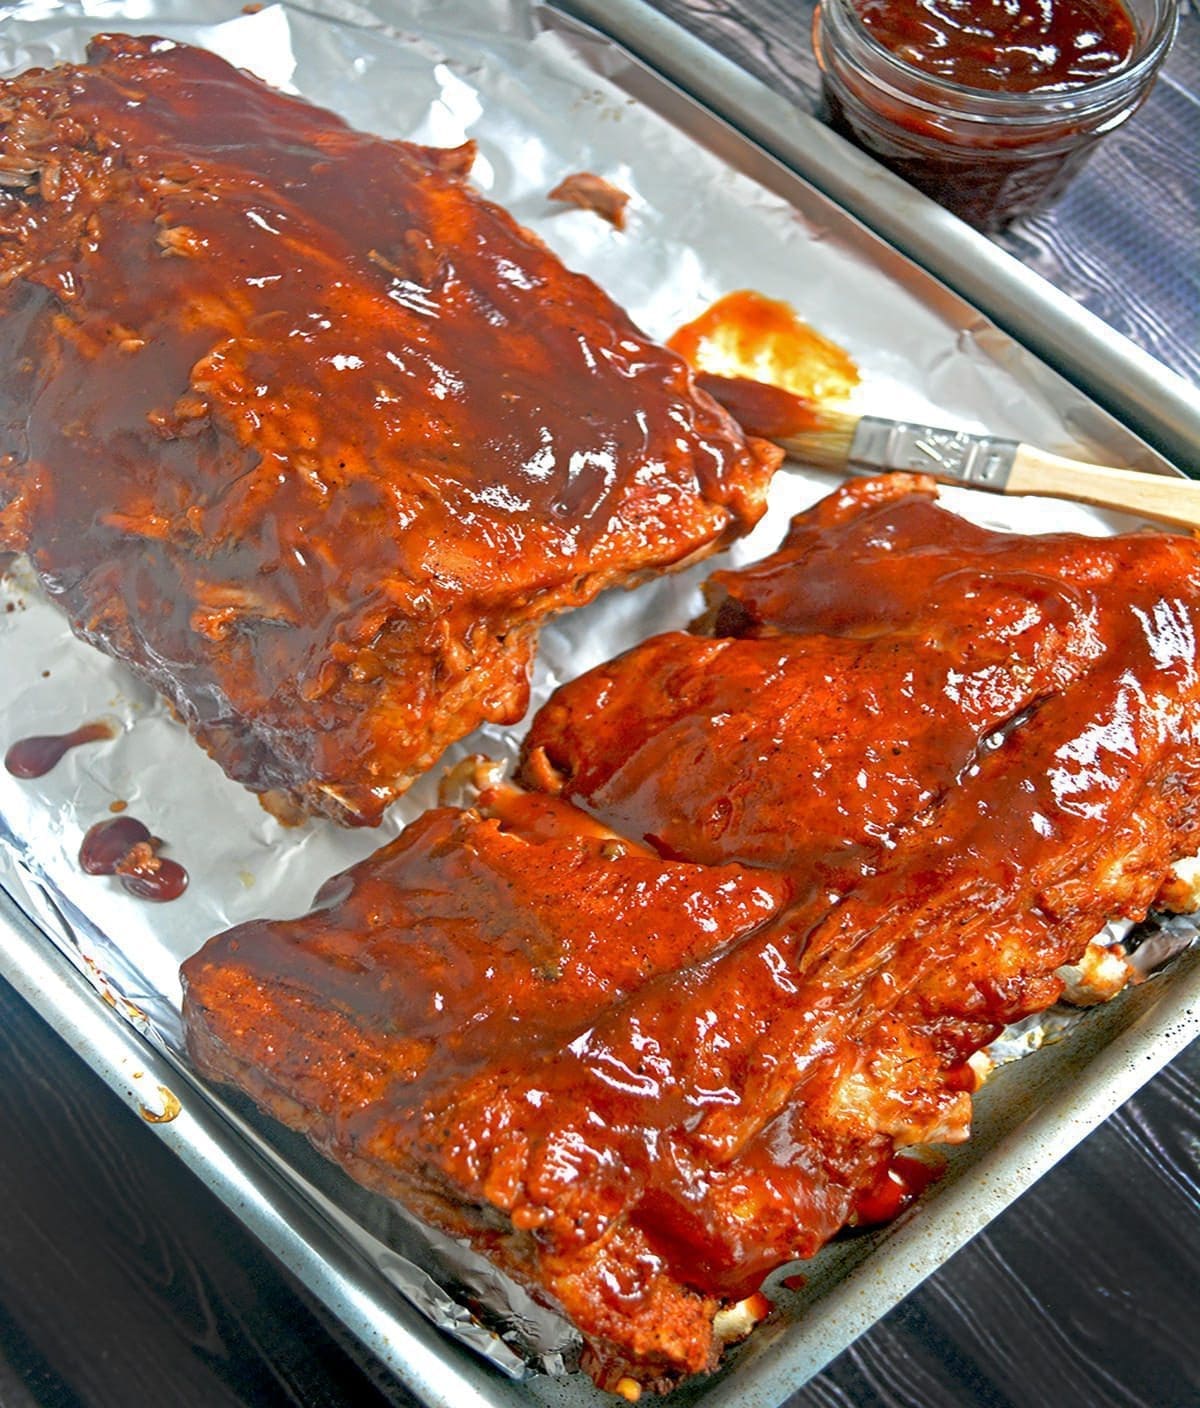 Two slabs of cooked ribs slathered in BBQ Sauce on a cookie sheet.